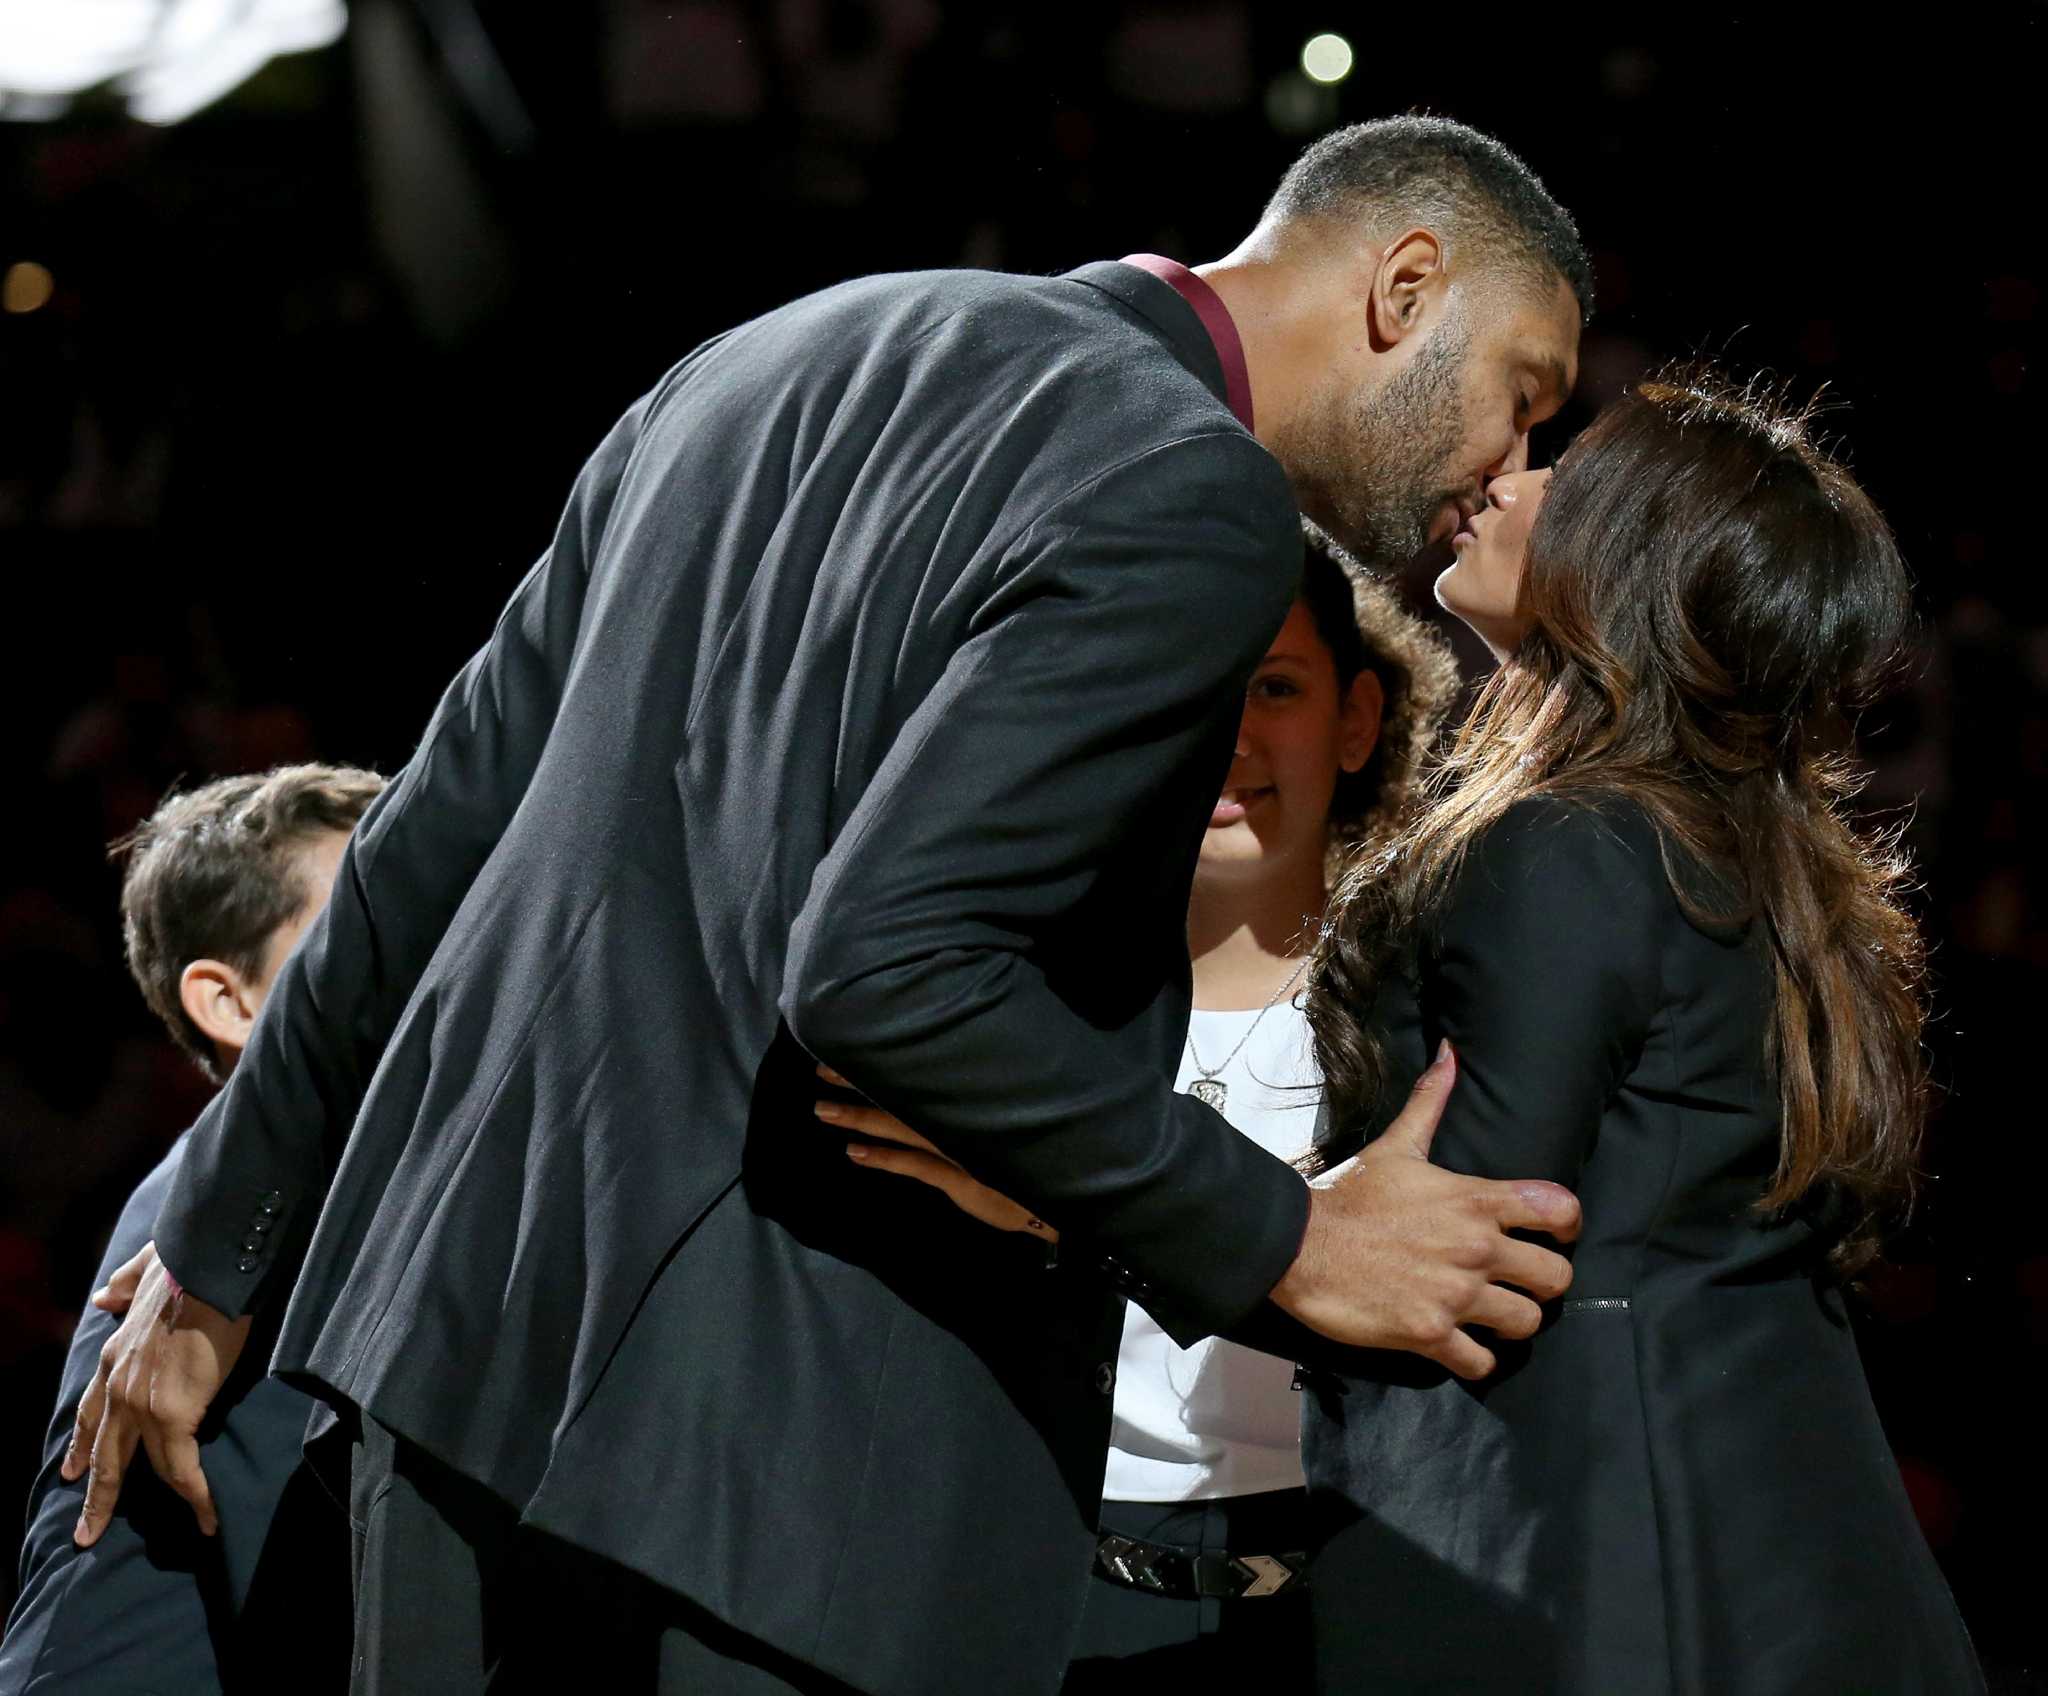 Tim Duncan, Vanessa Macias just had a baby girl, named her after Marvel character - SFGate